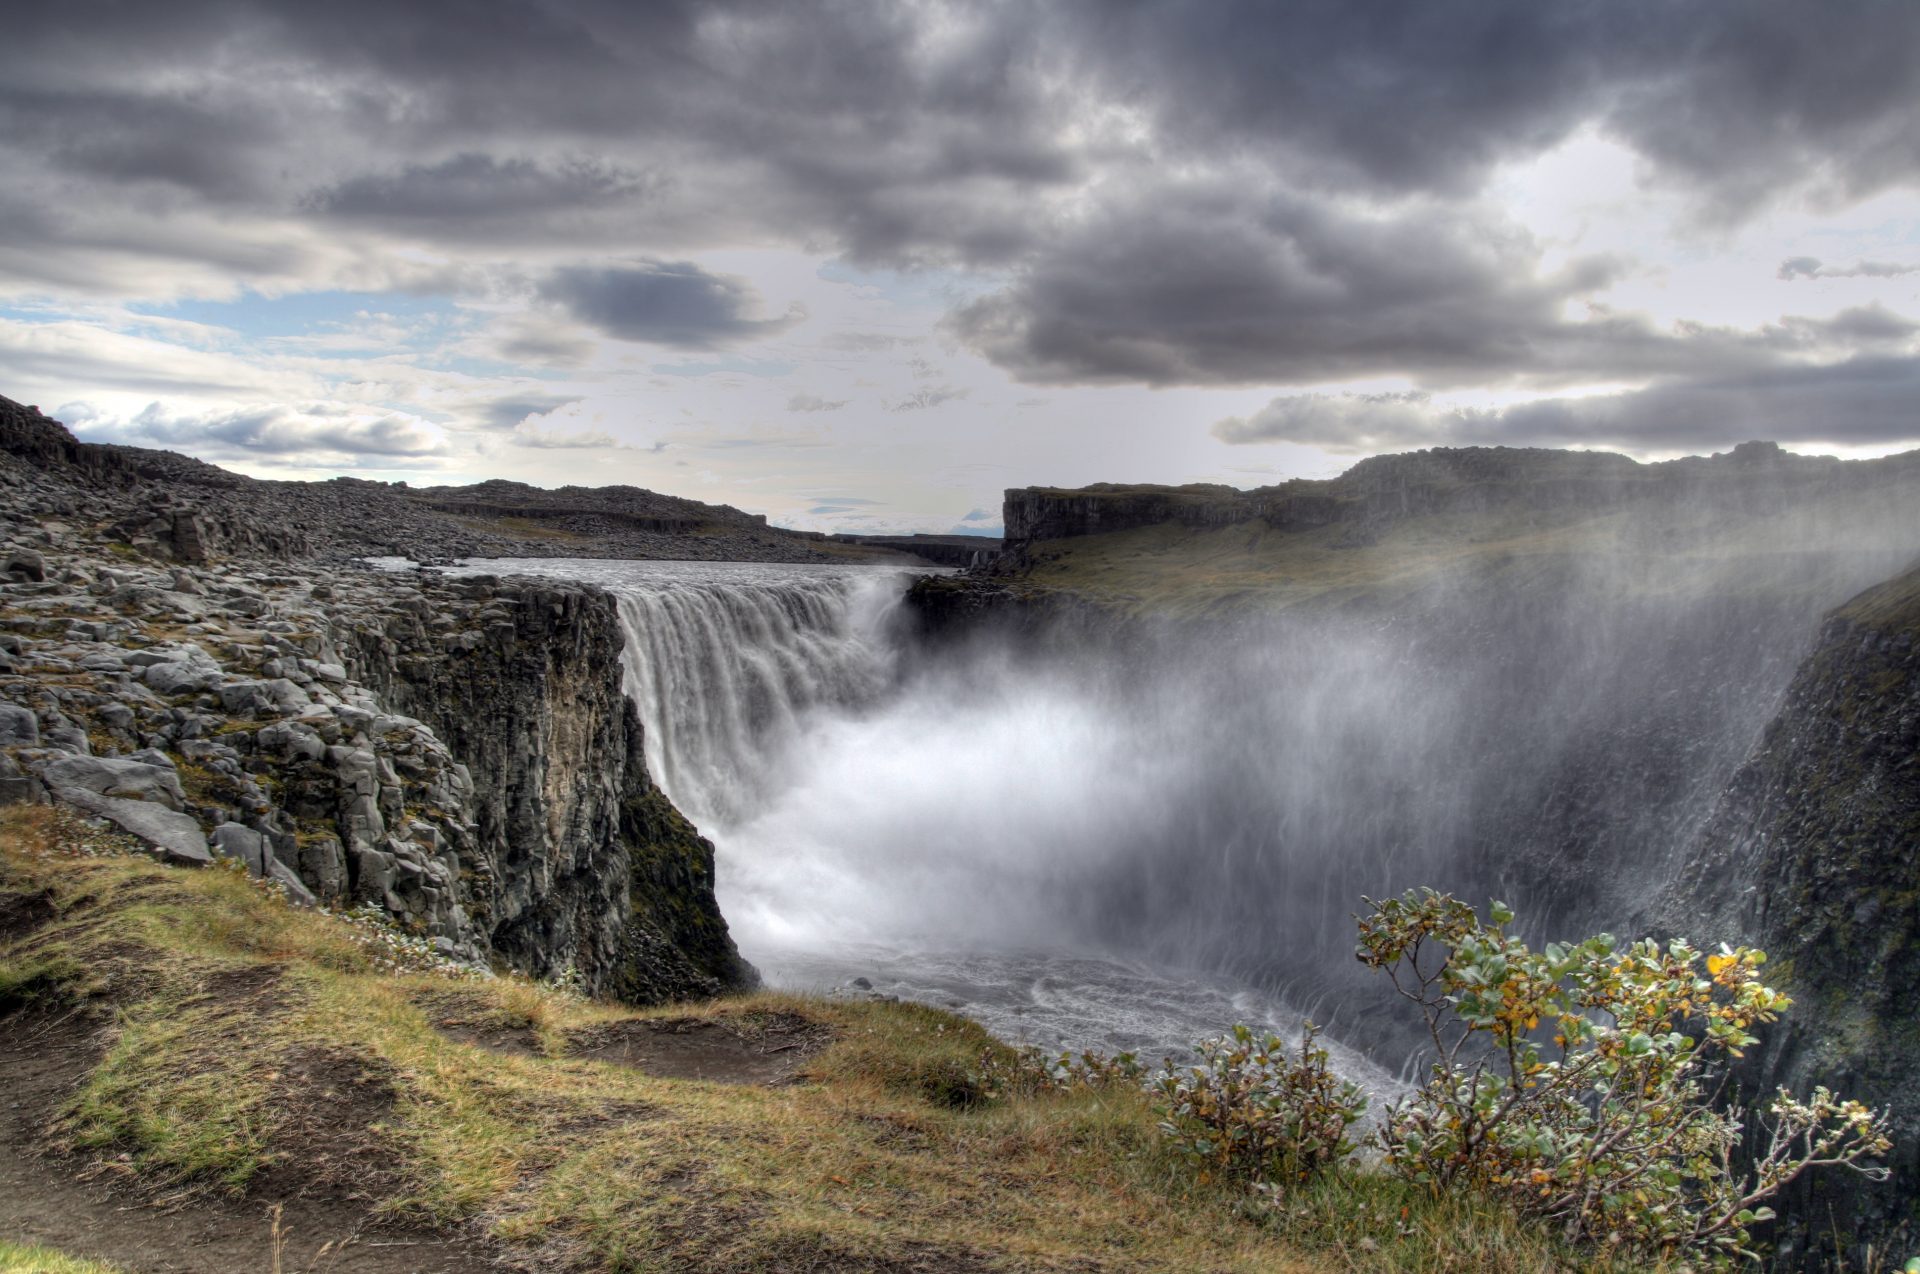 dettifoss iceland - Travel Contests: June 30th, 2021 - Iceland, Italy, Peru & more